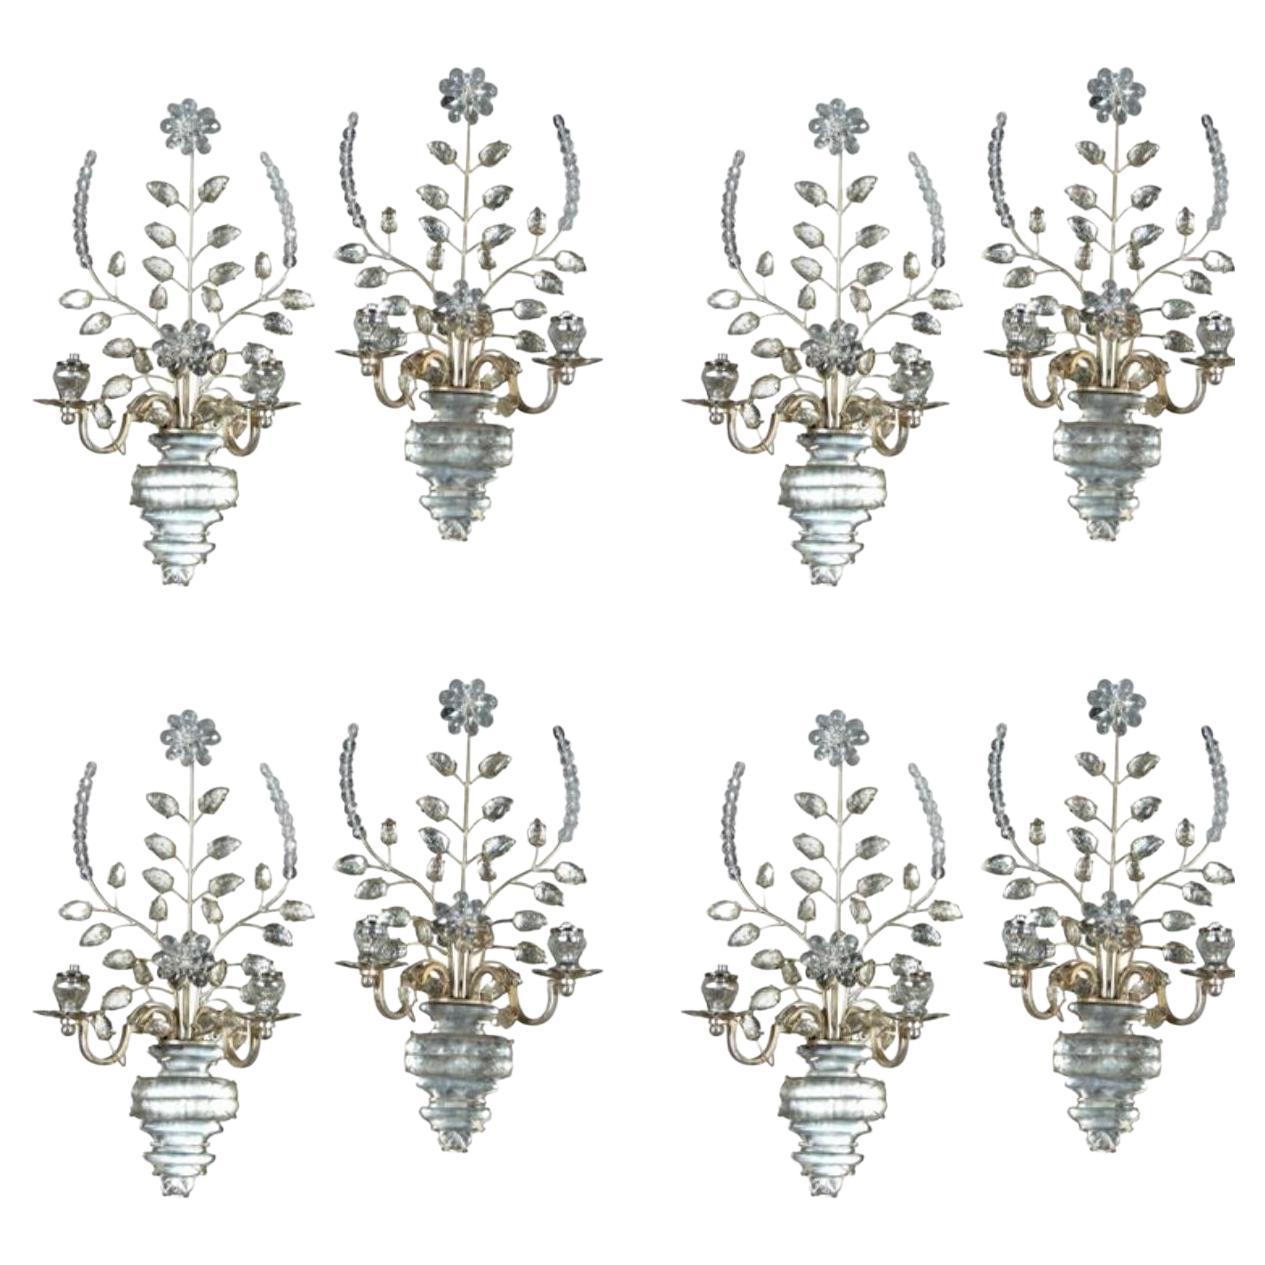 French Provincial 1930's French Bagues Silver Plated Sconces For Sale